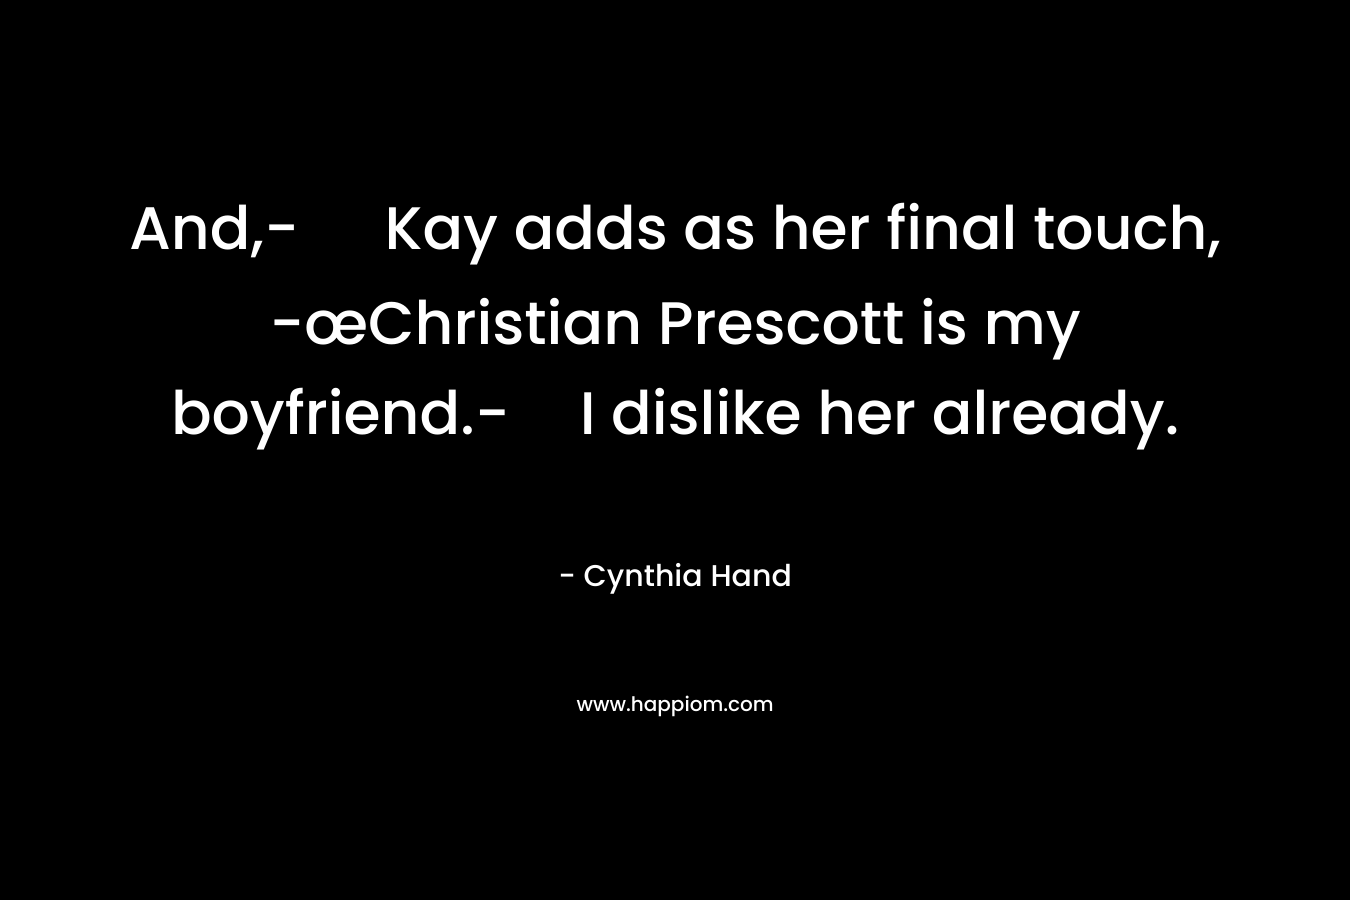 And,- Kay adds as her final touch, -œChristian Prescott is my boyfriend.-I dislike her already. – Cynthia Hand